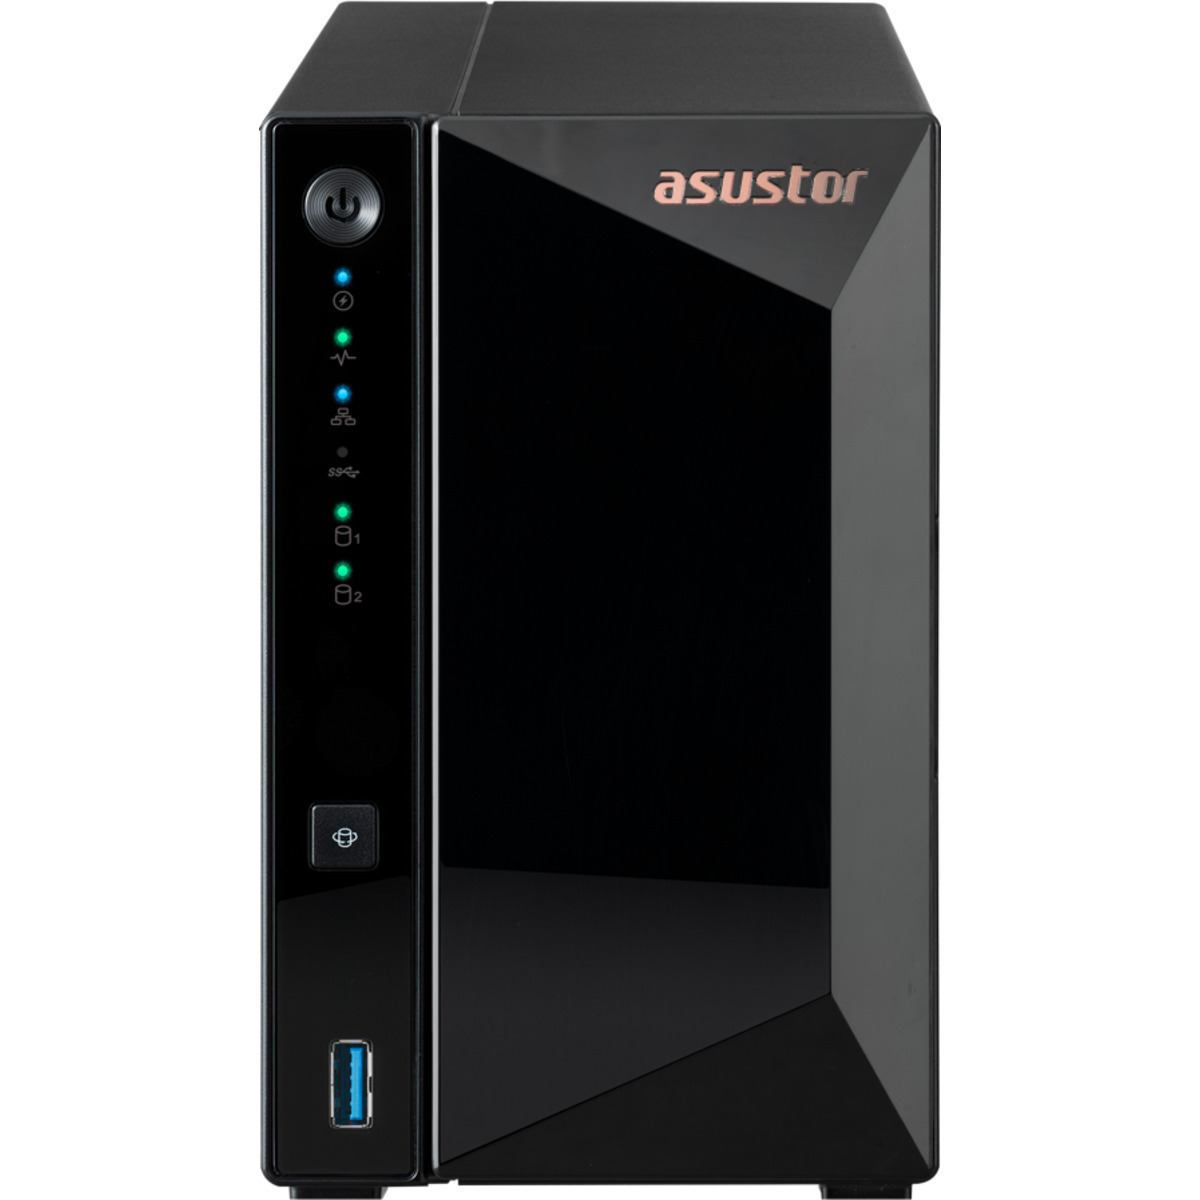 ASUSTOR DRIVESTOR 2 Pro Gen2 AS3302T v2 24tb 2-Bay Desktop Personal / Basic Home / Small Office NAS - Network Attached Storage Device 2x12tb Seagate IronWolf Pro ST12000NT001 3.5 7200rpm SATA 6Gb/s HDD NAS Class Drives Installed - Burn-In Tested - ON SALE DRIVESTOR 2 Pro Gen2 AS3302T v2